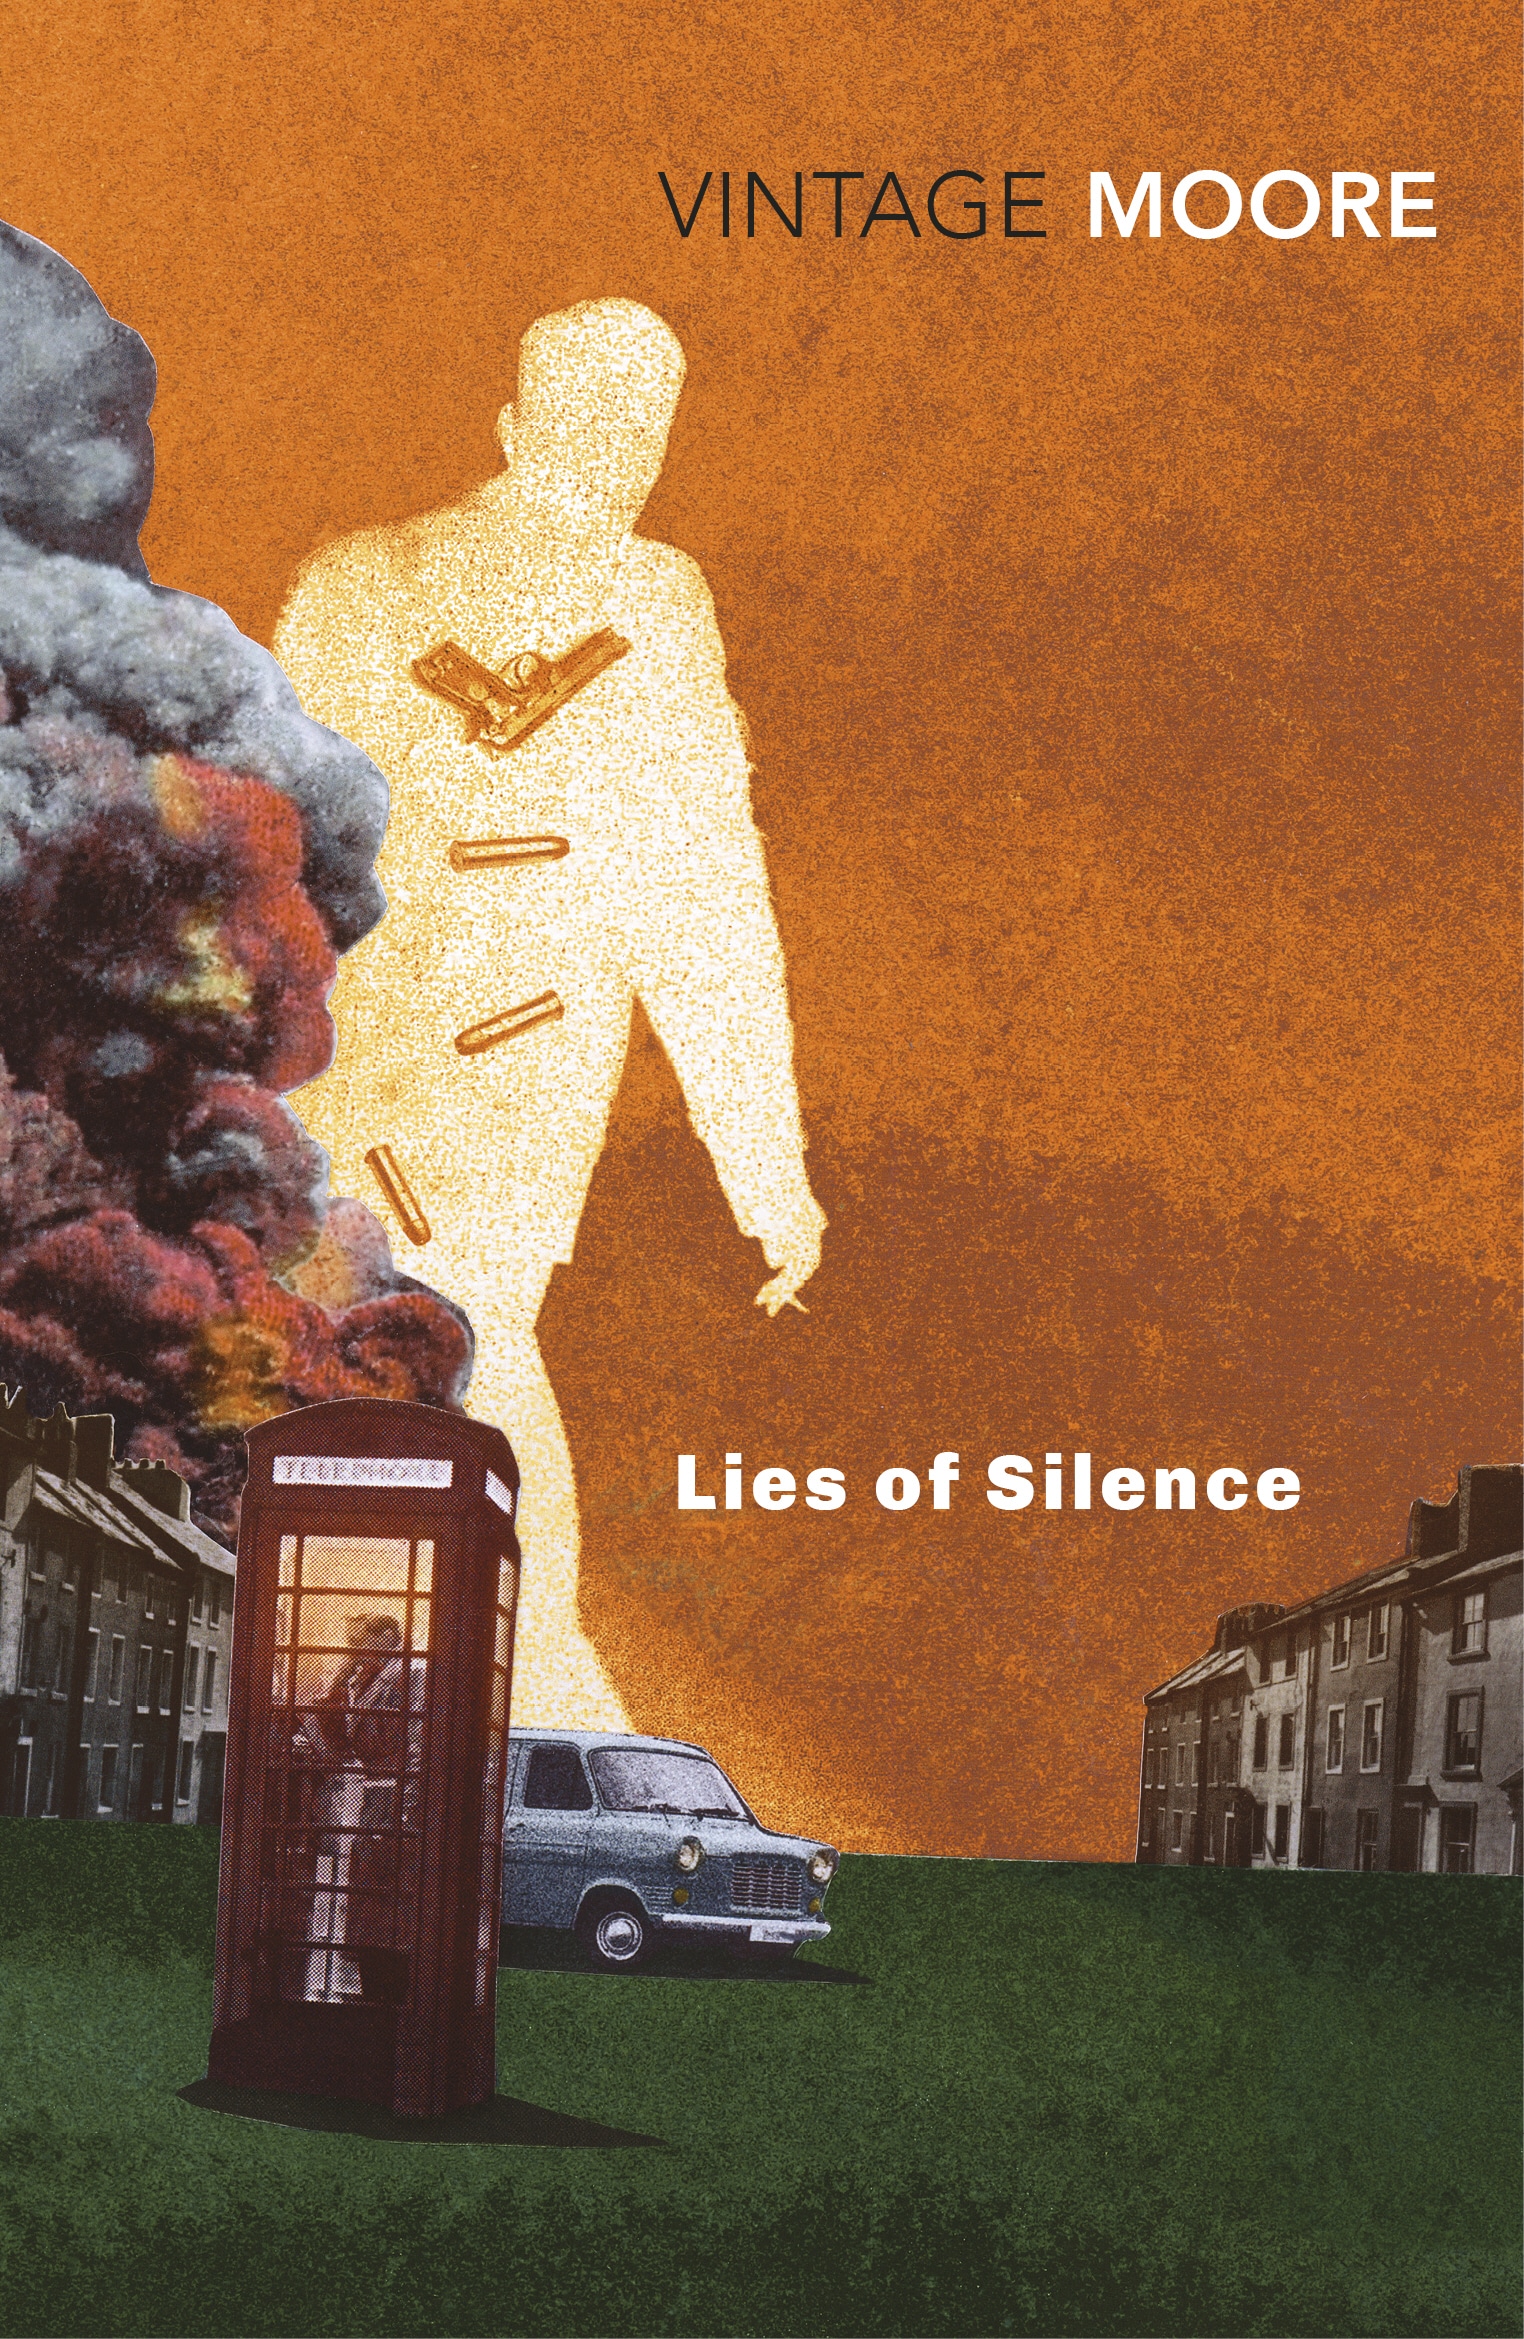 Book “Lies of Silence” by Brian Moore — May 2, 2019